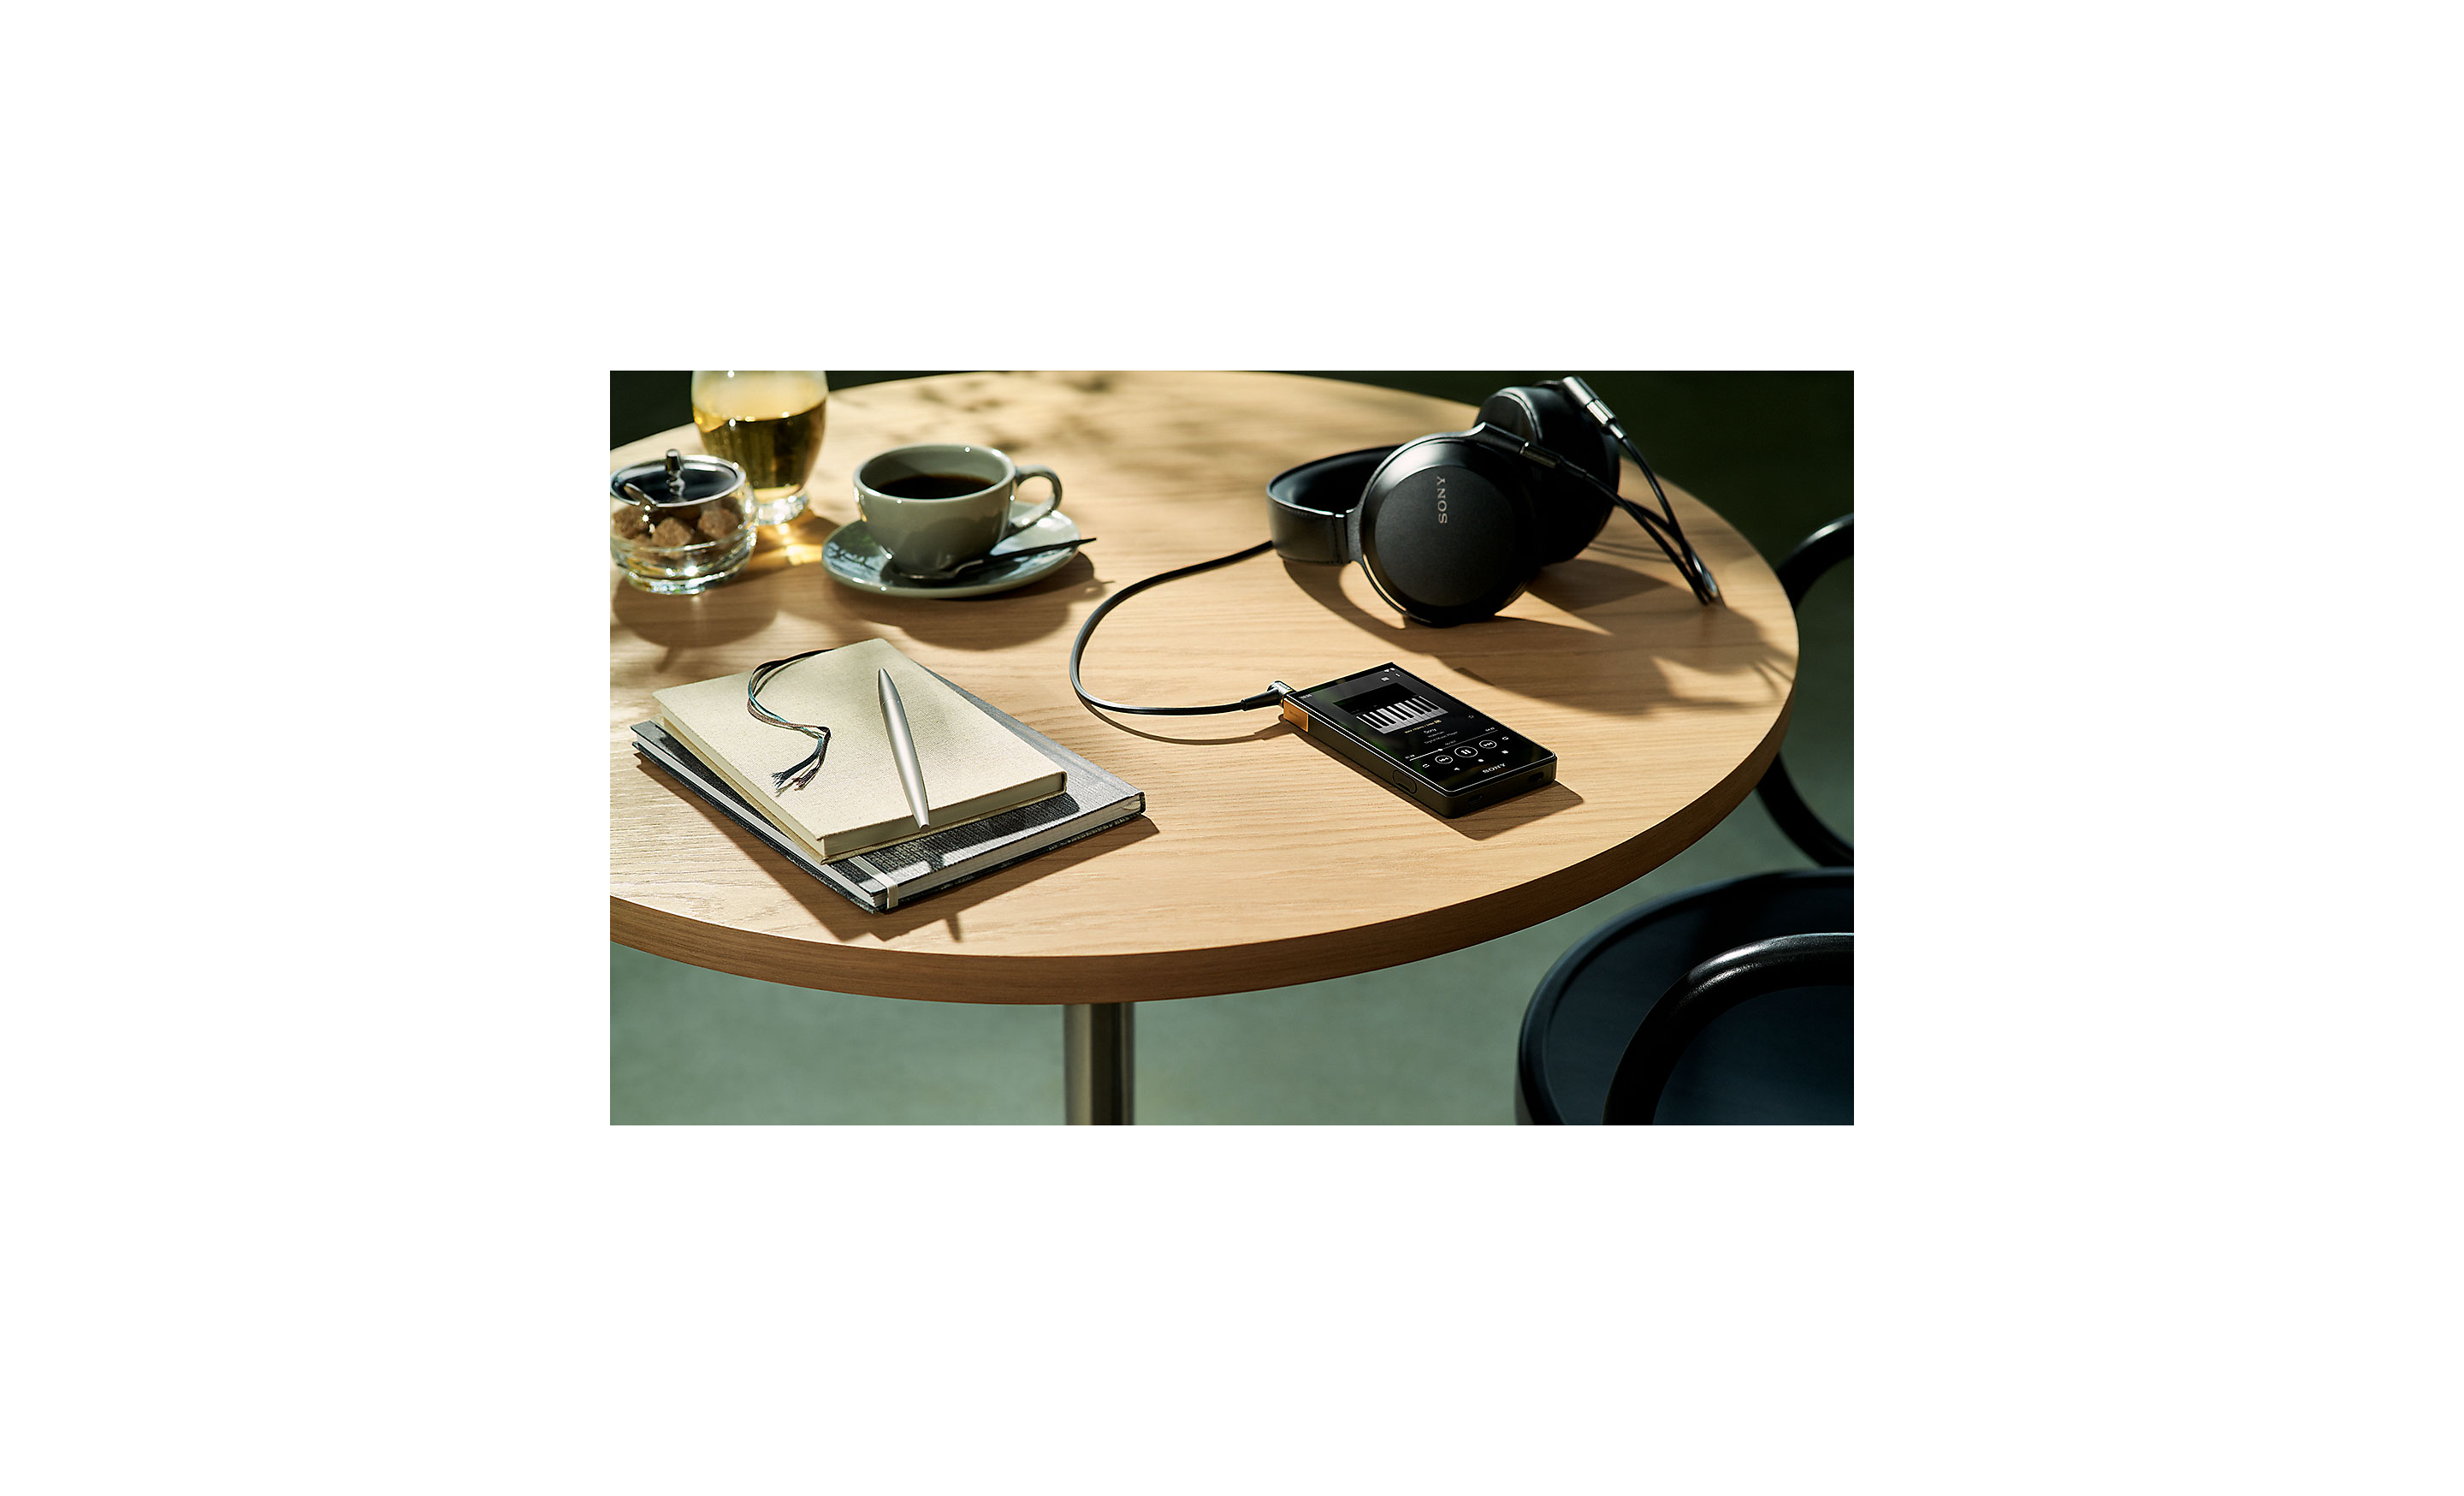 An image of the NW-ZX707 laying on a table, with Sony headphones.